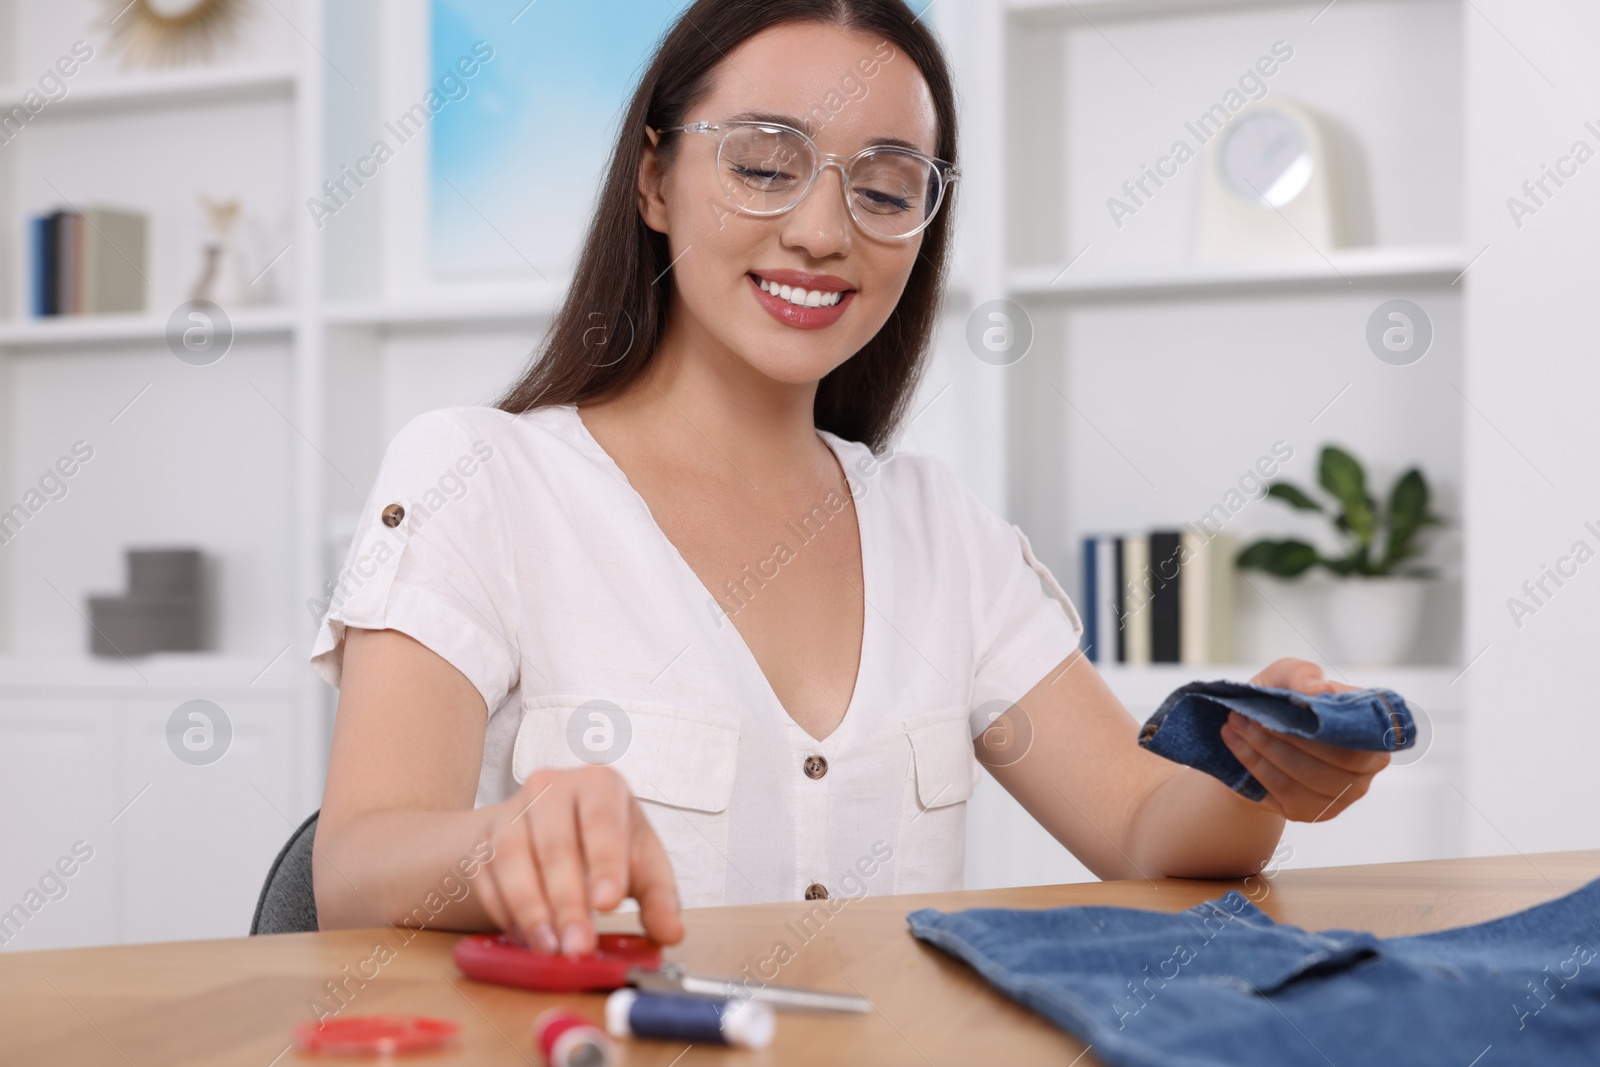 Photo of Happy woman holding cut hem and jeans at table indoors